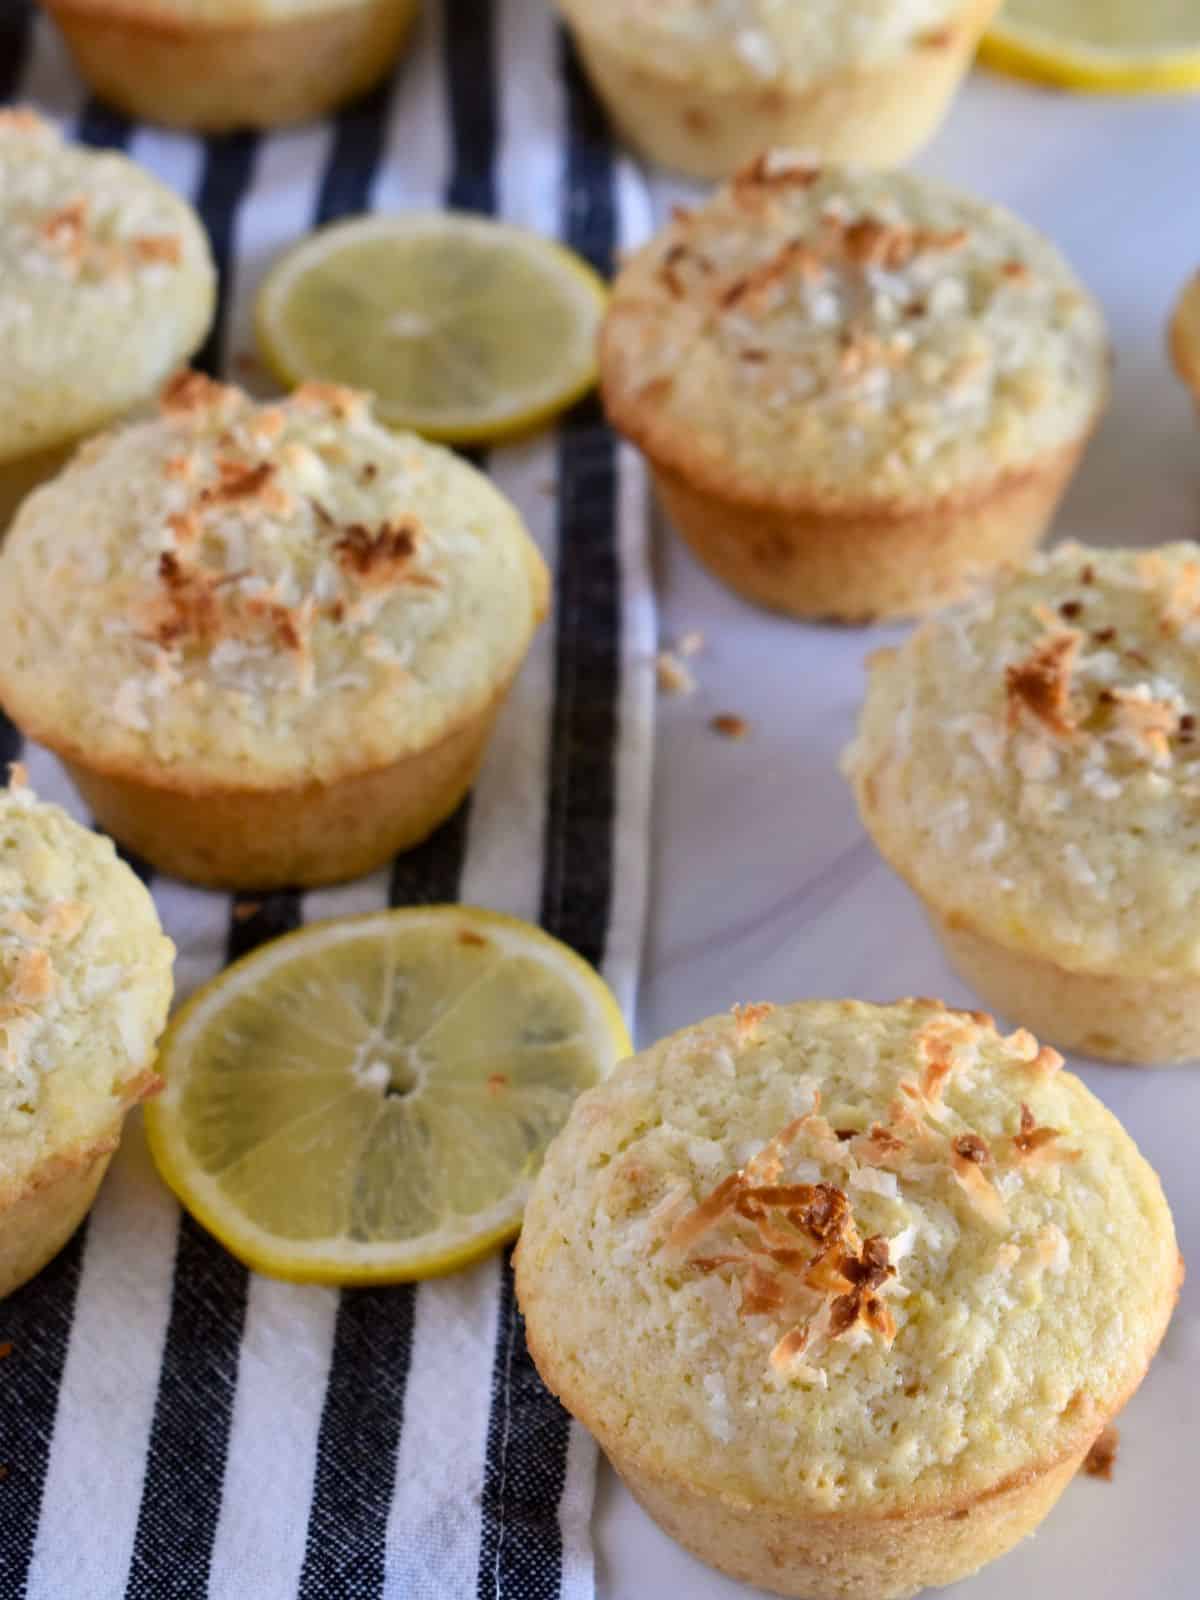 Lemon coconut muffins recipe on a stripped towel with slices of lemon. 